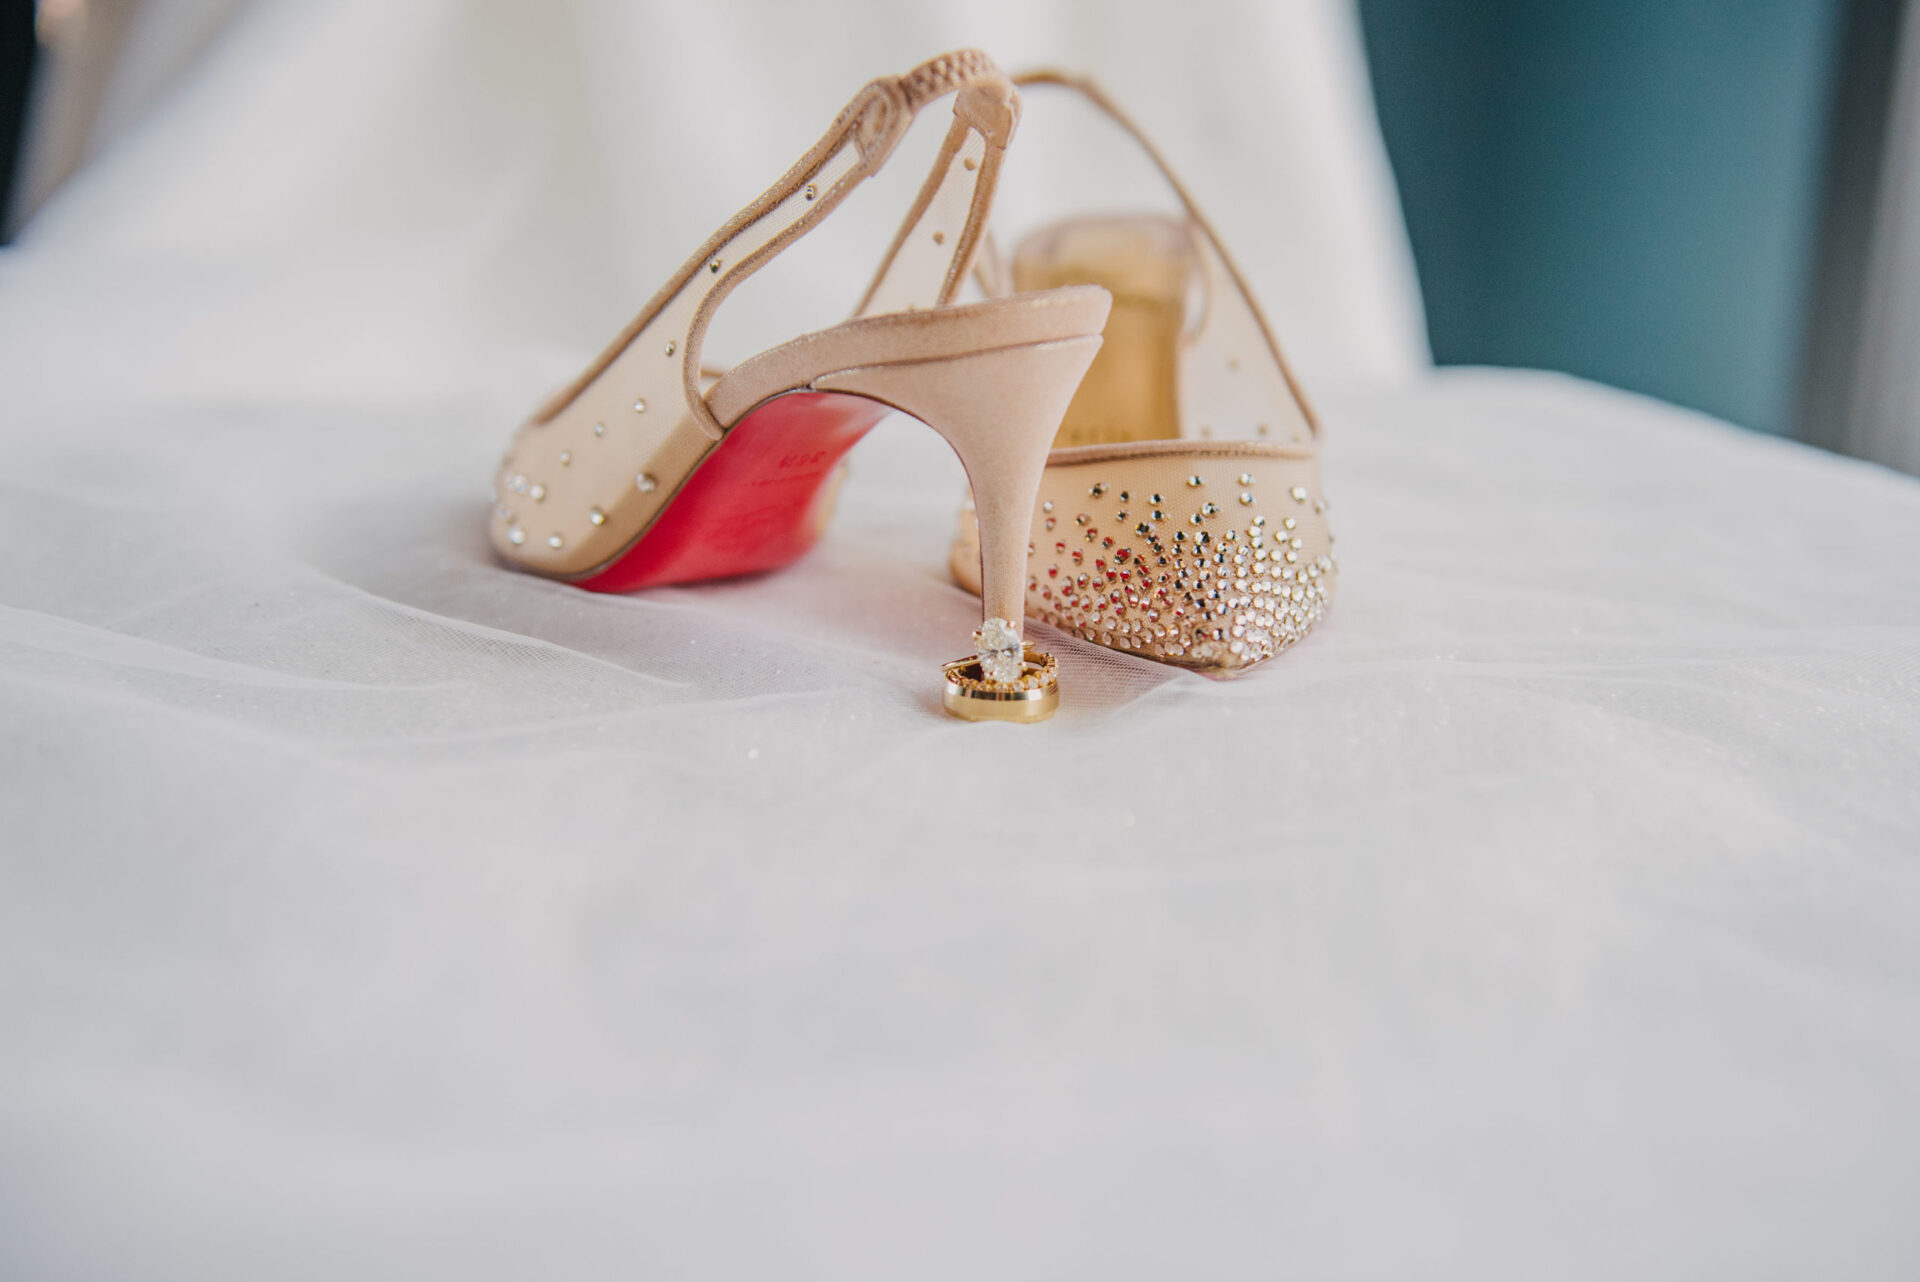 A pair of high heels with a gold heel, adding elegance and glamour to any outfit.